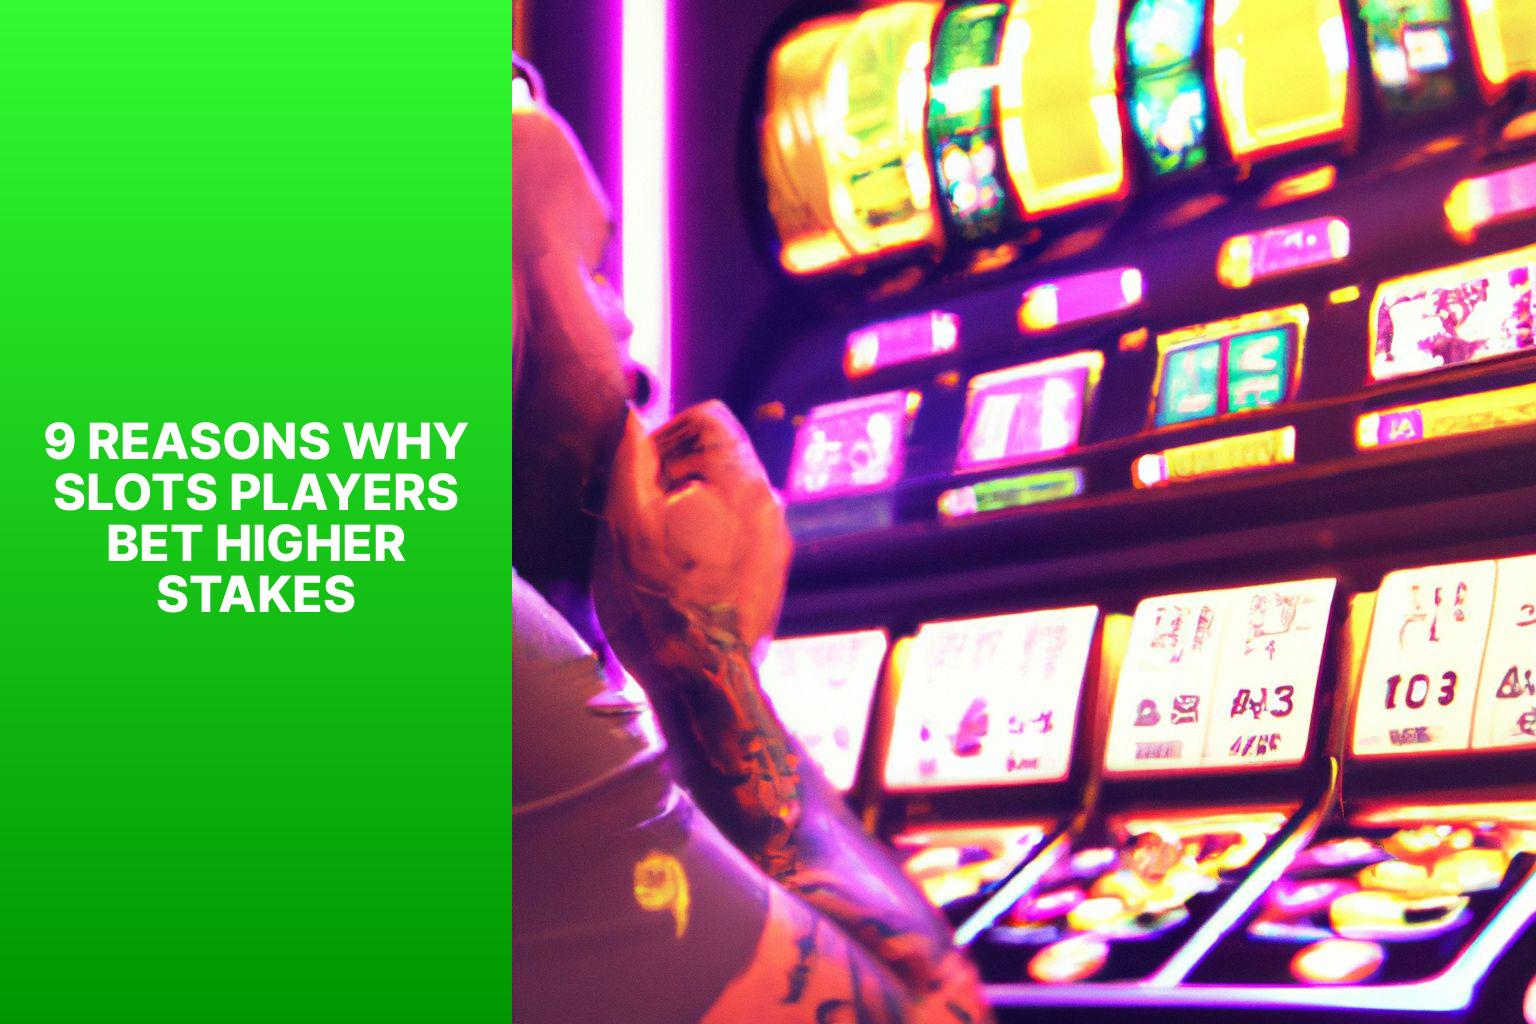 9 Reasons Why Slots Players Bet Higher Stakes